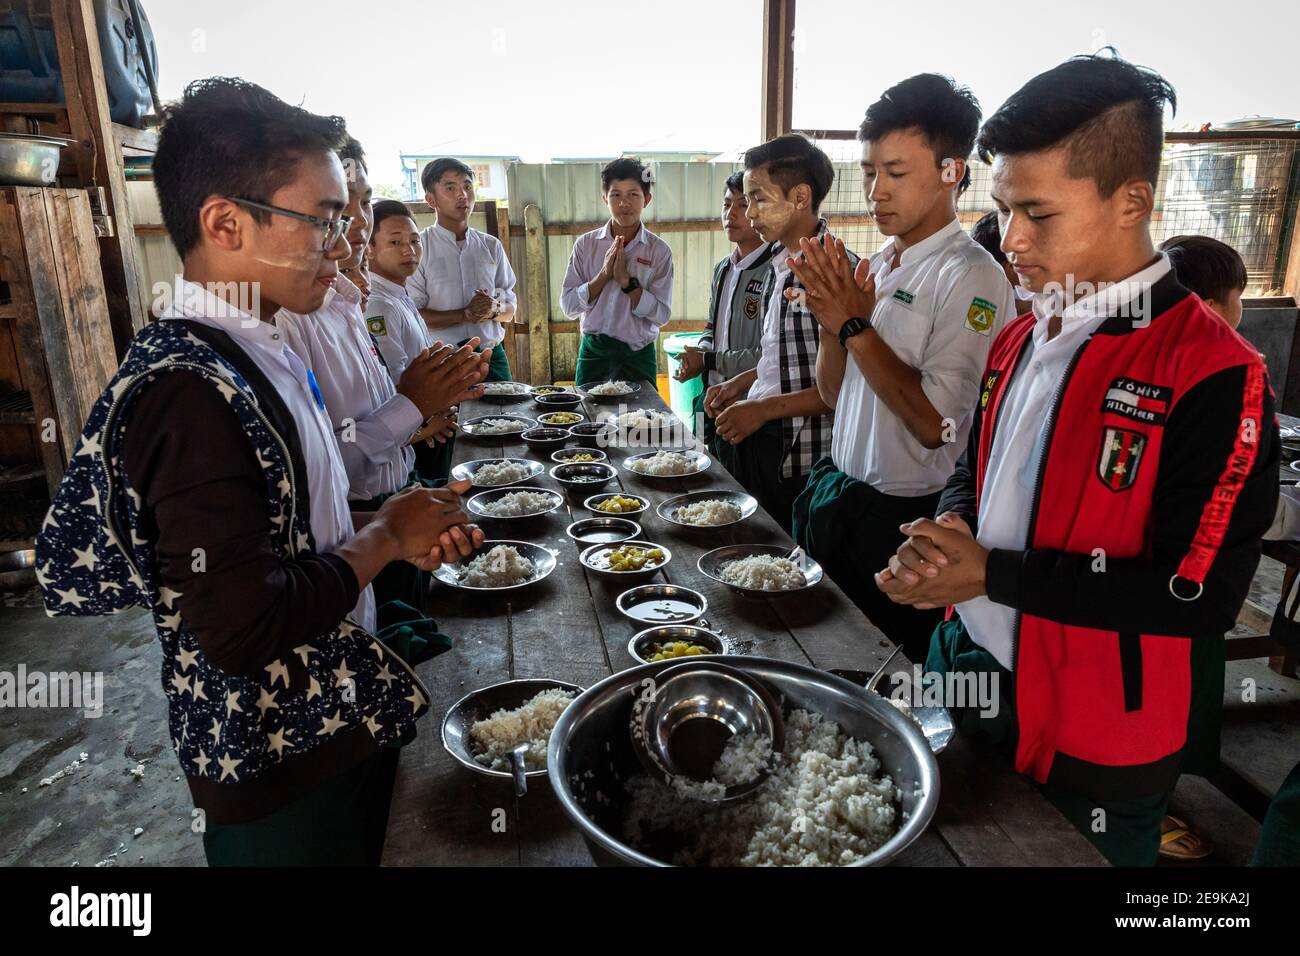 The students, most of whom are orphans who fled the civil war, come to their Chinpwi Education Boarding School in Myikyina, Myanmar, during their lunch break. The headmistress, Mai Wgi Lathe, distributes the food from the large cooking pots. Stock Photo